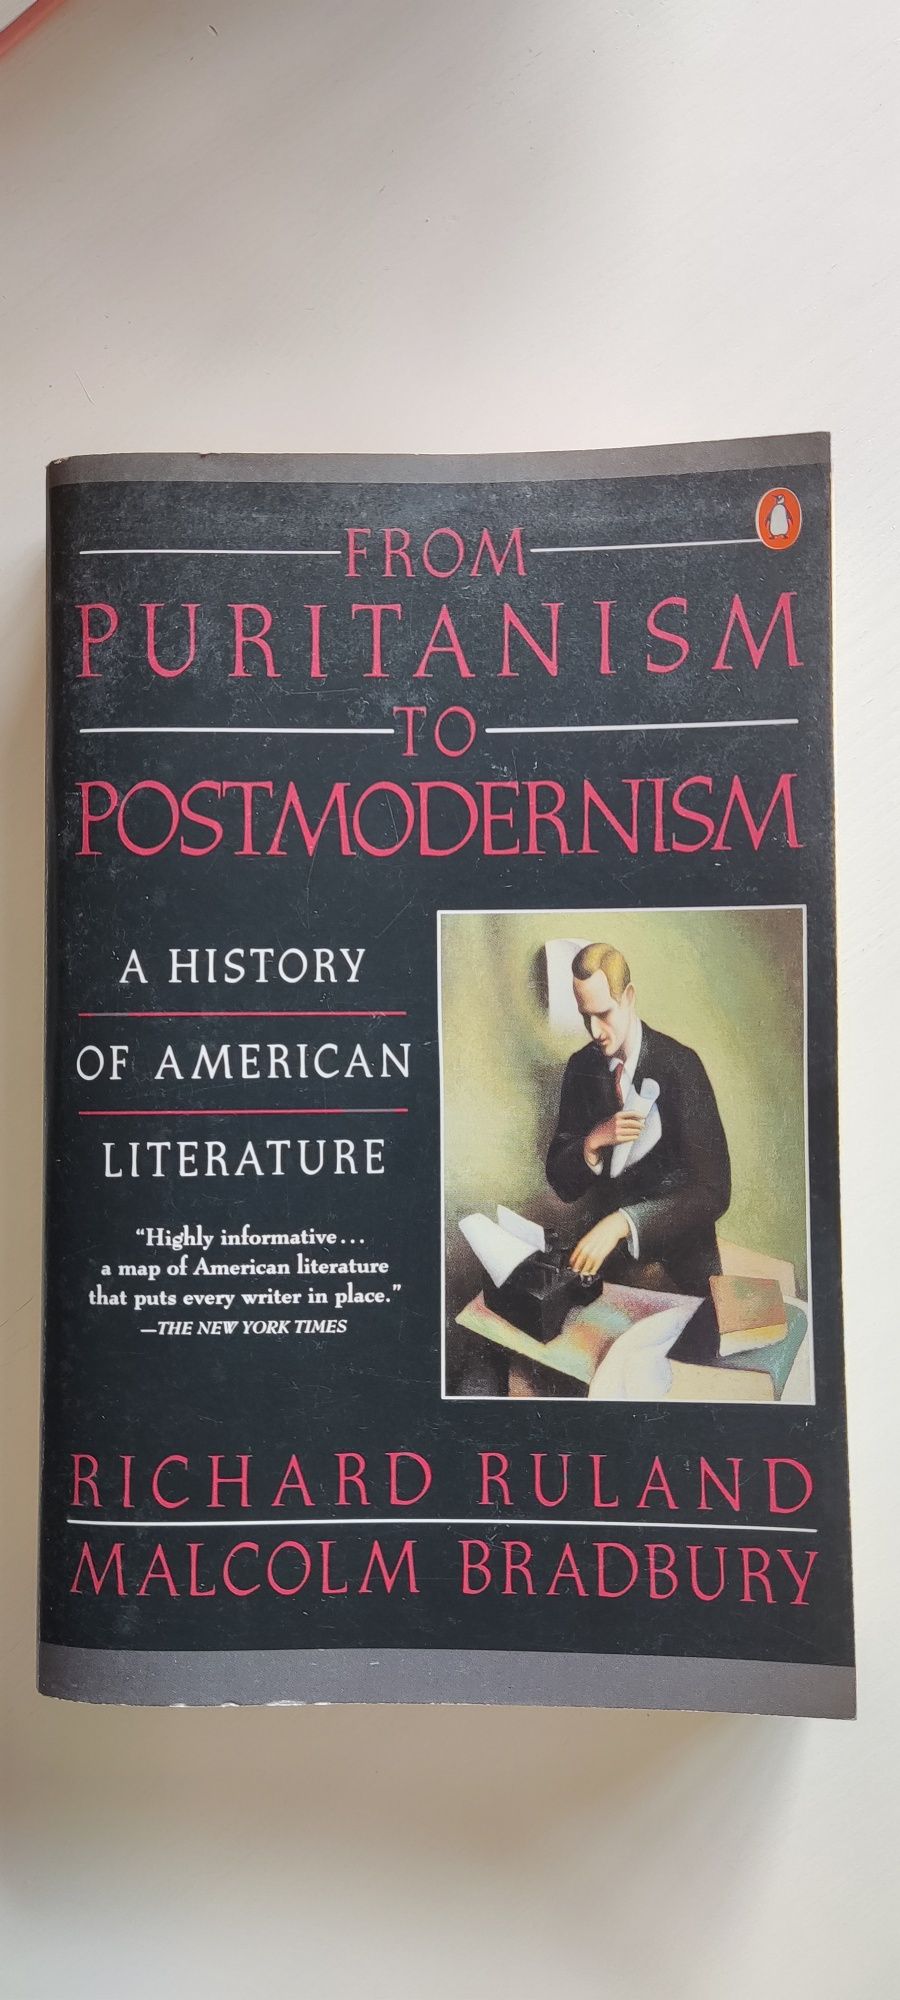 Livro "From puritanism to postmodernism"